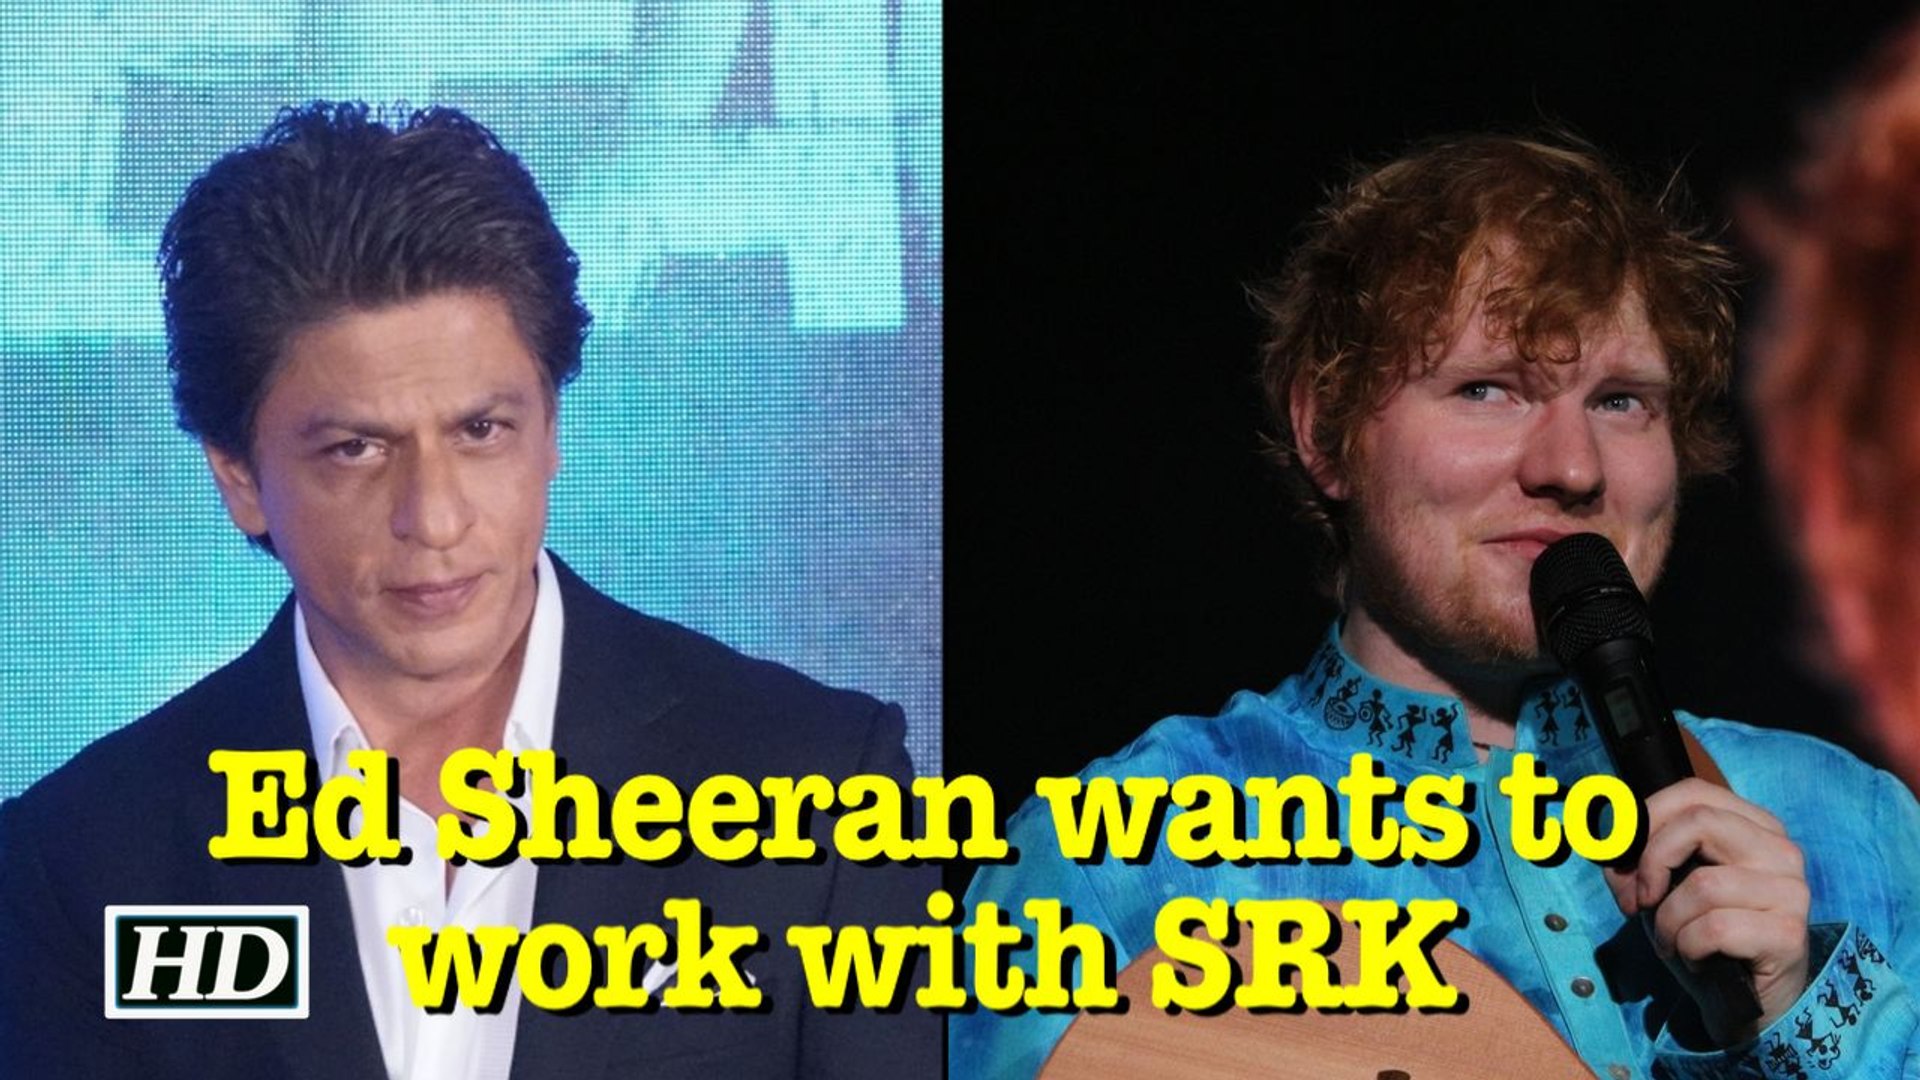 Ed Sheeran wants to work with SRK in Bollywood!